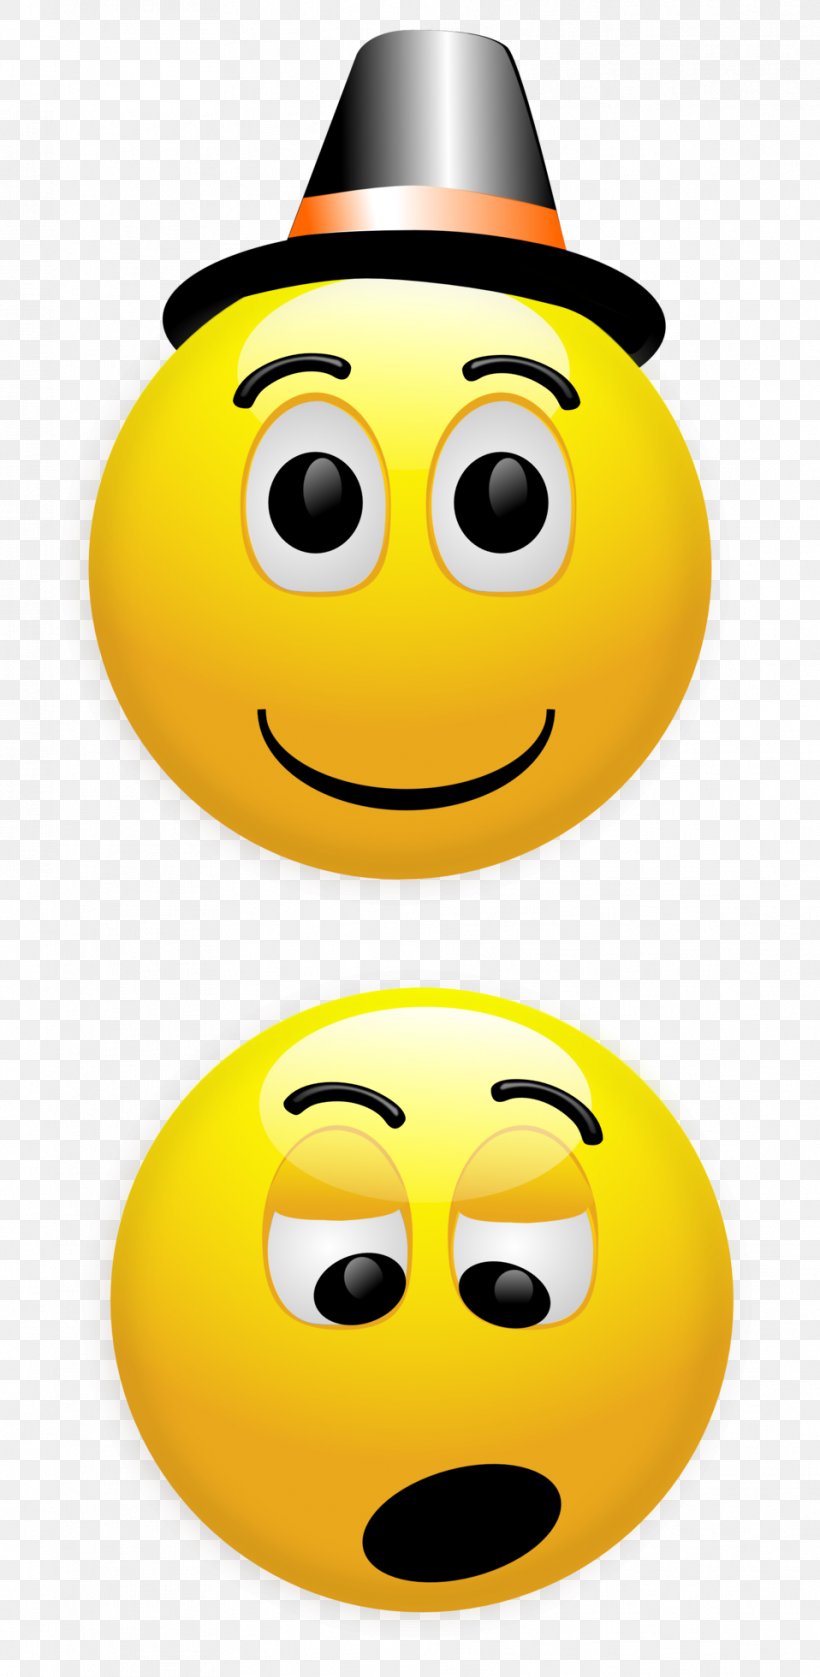 Emoticon Smiley Clip Art, PNG, 958x1960px, Emoticon, Happiness, Laughter, Smile, Smiley Download Free